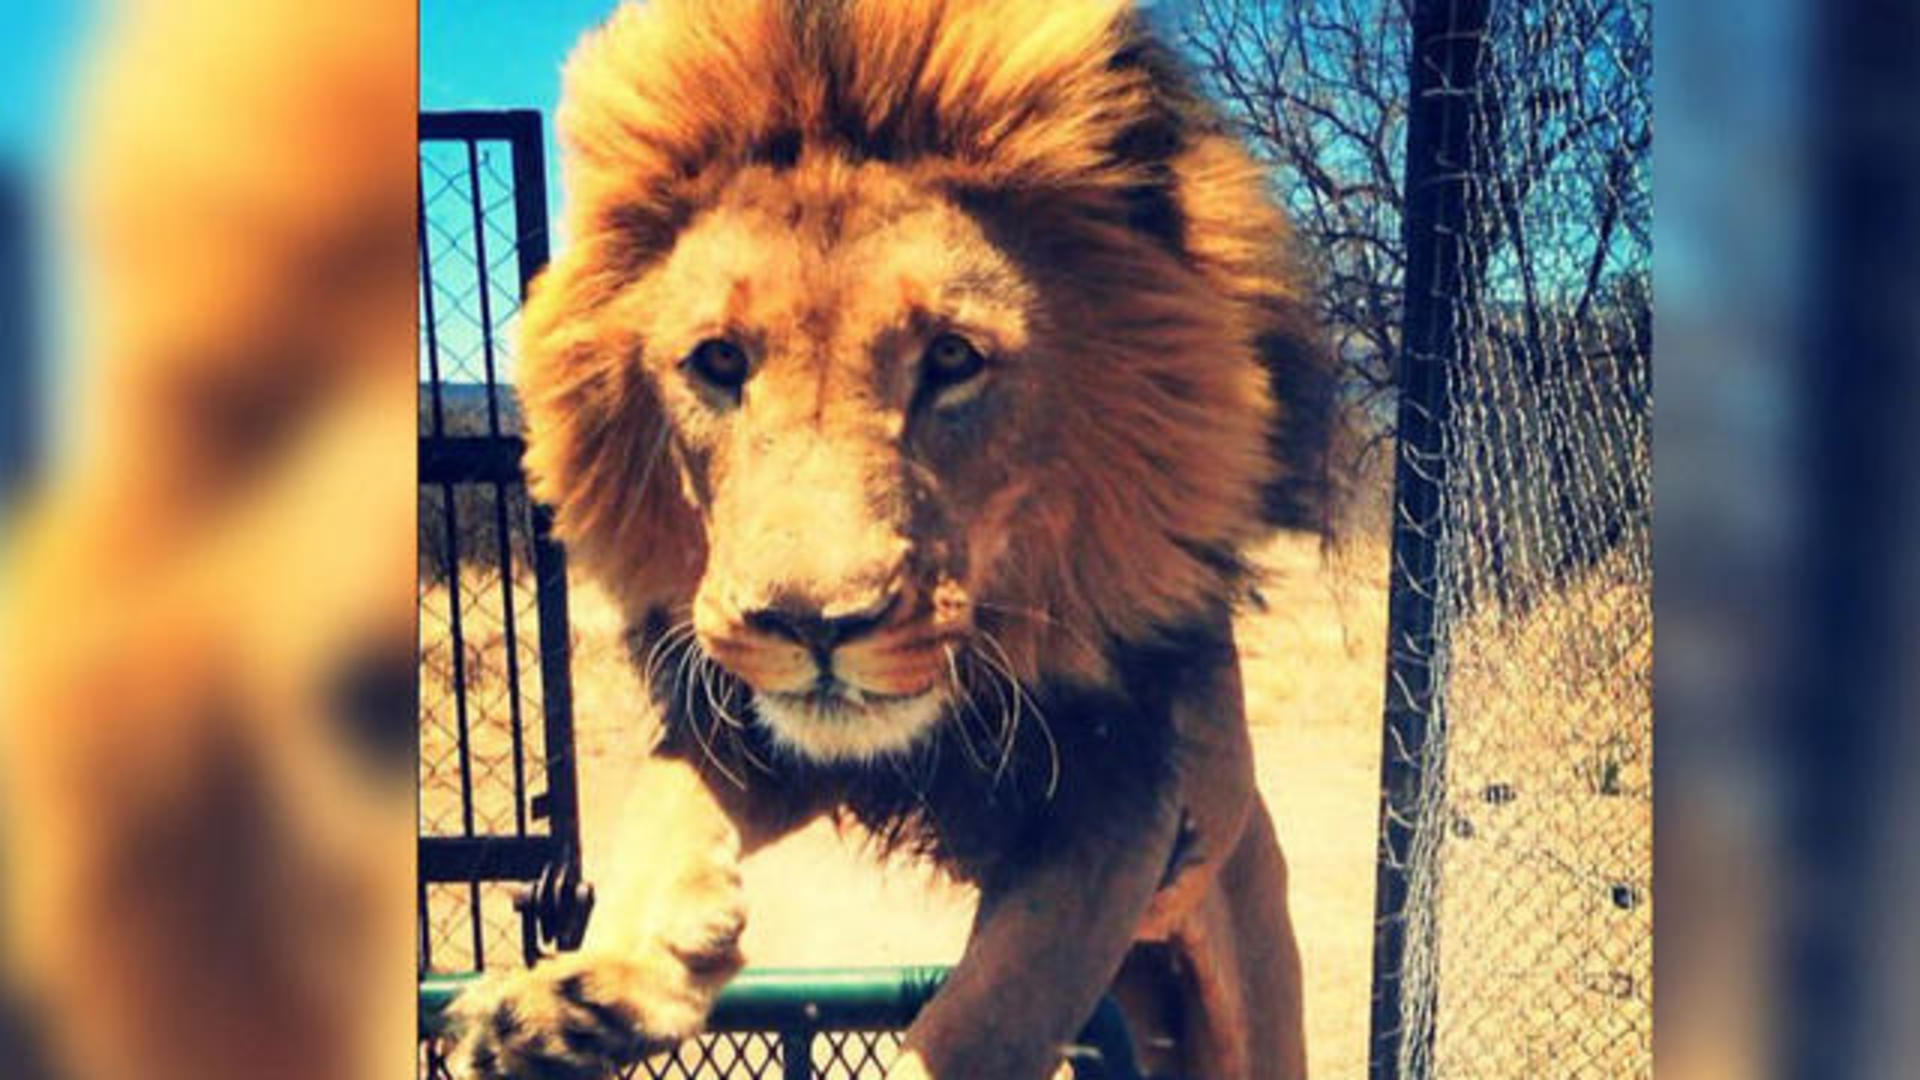 Dramatic video shows lion mauling animal sanctuary owner - CBS News